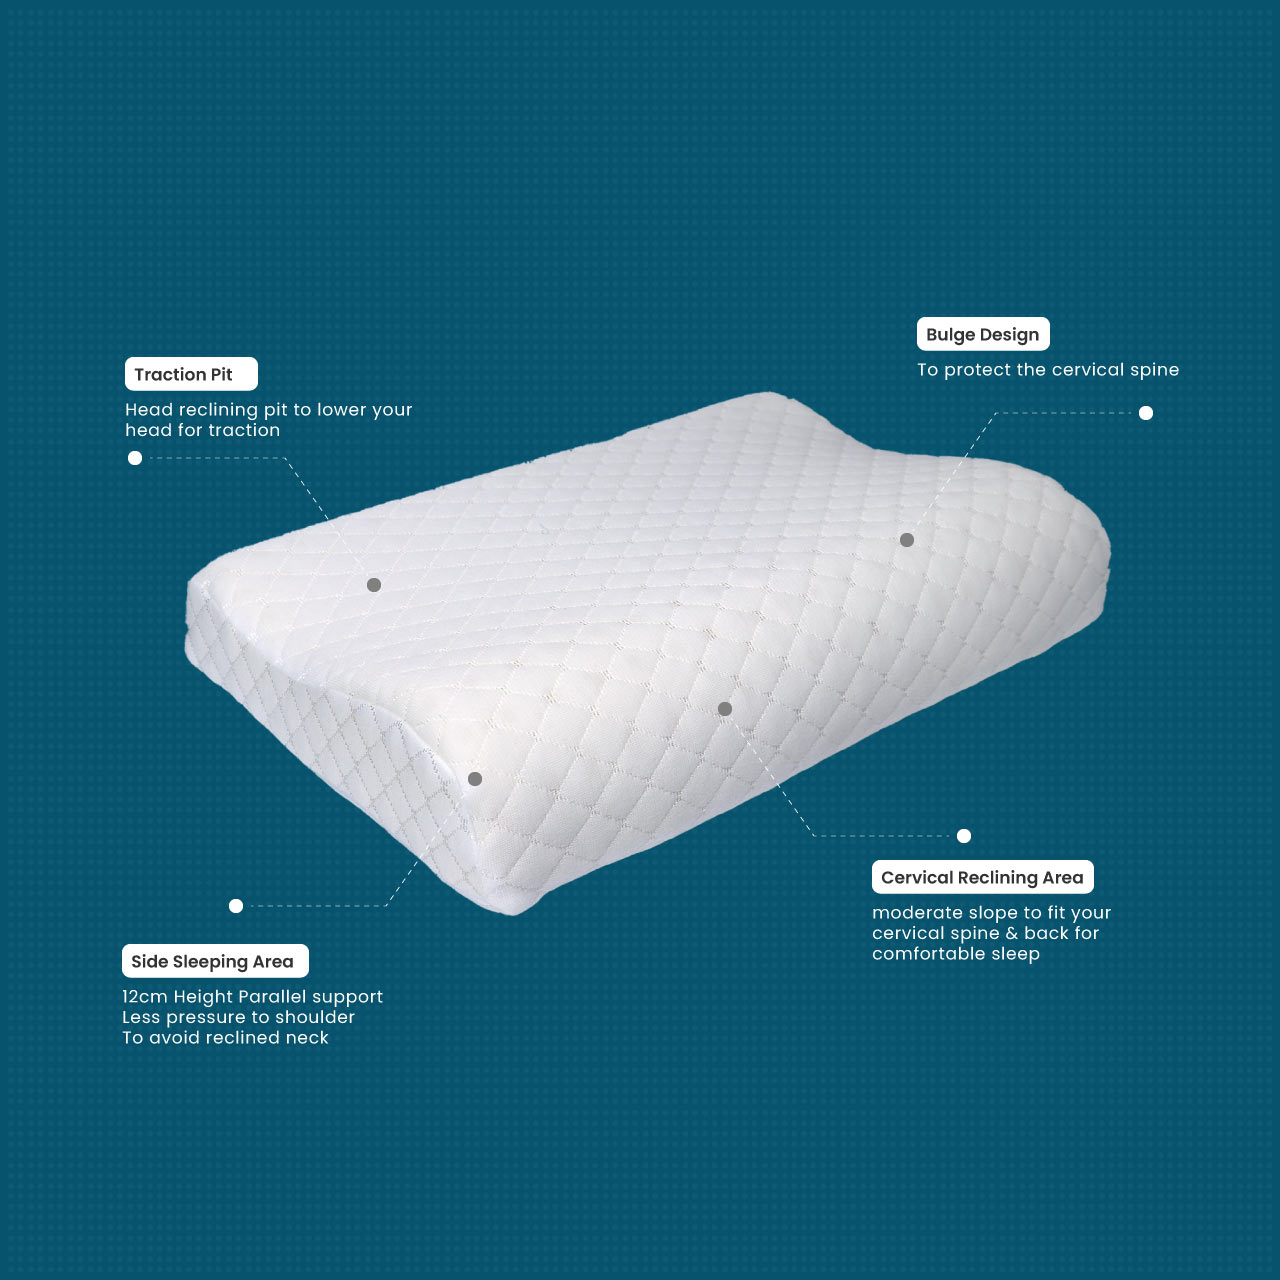 High Quality Standard Size 40x60 (9x11) Knitted Anti Snore Contour Cervical Neck Support Memory Foam Pillow with Washable White Cover